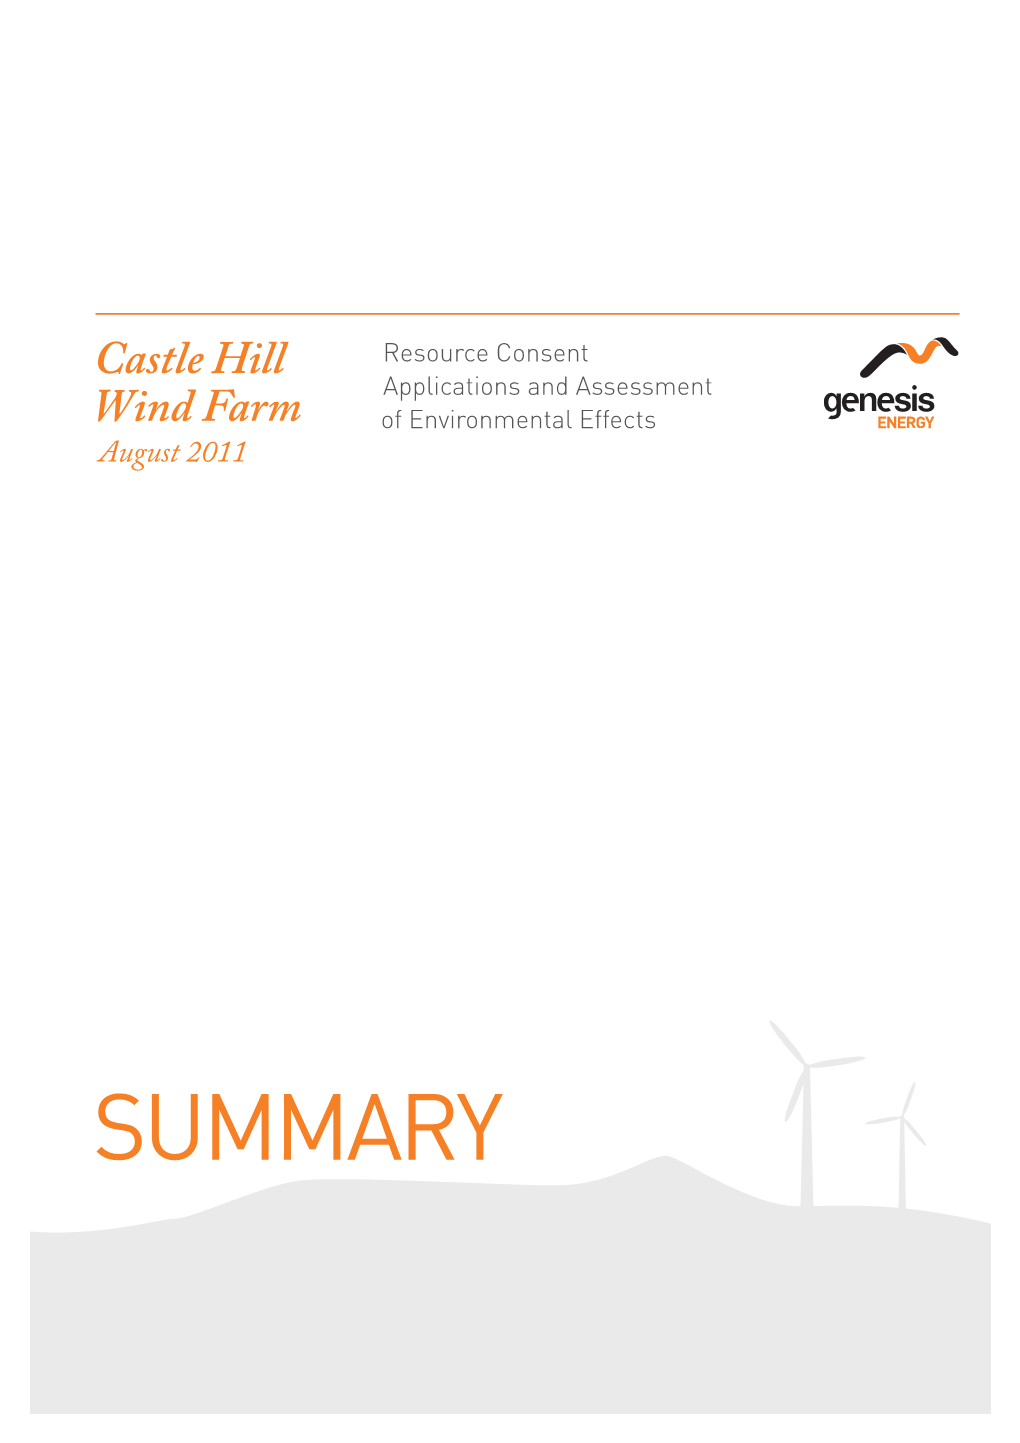 Castle Hill Wind Farm Resource Consent Applications and Assessment of Environmental Effects Summary